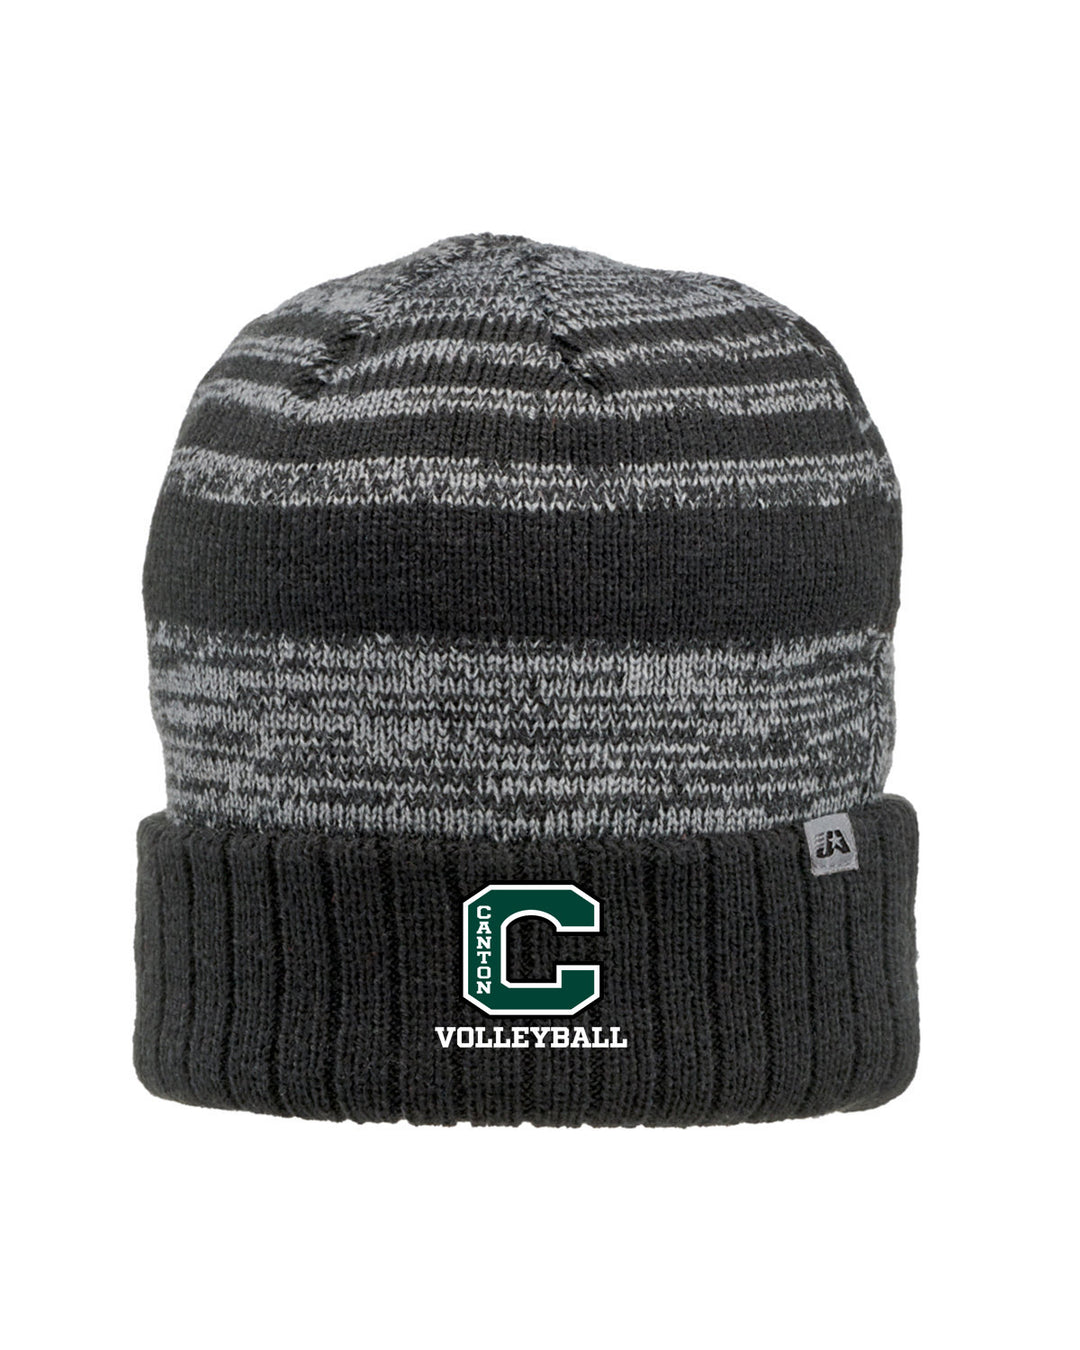 Canton Volleyball Knit Hat (TW5000)